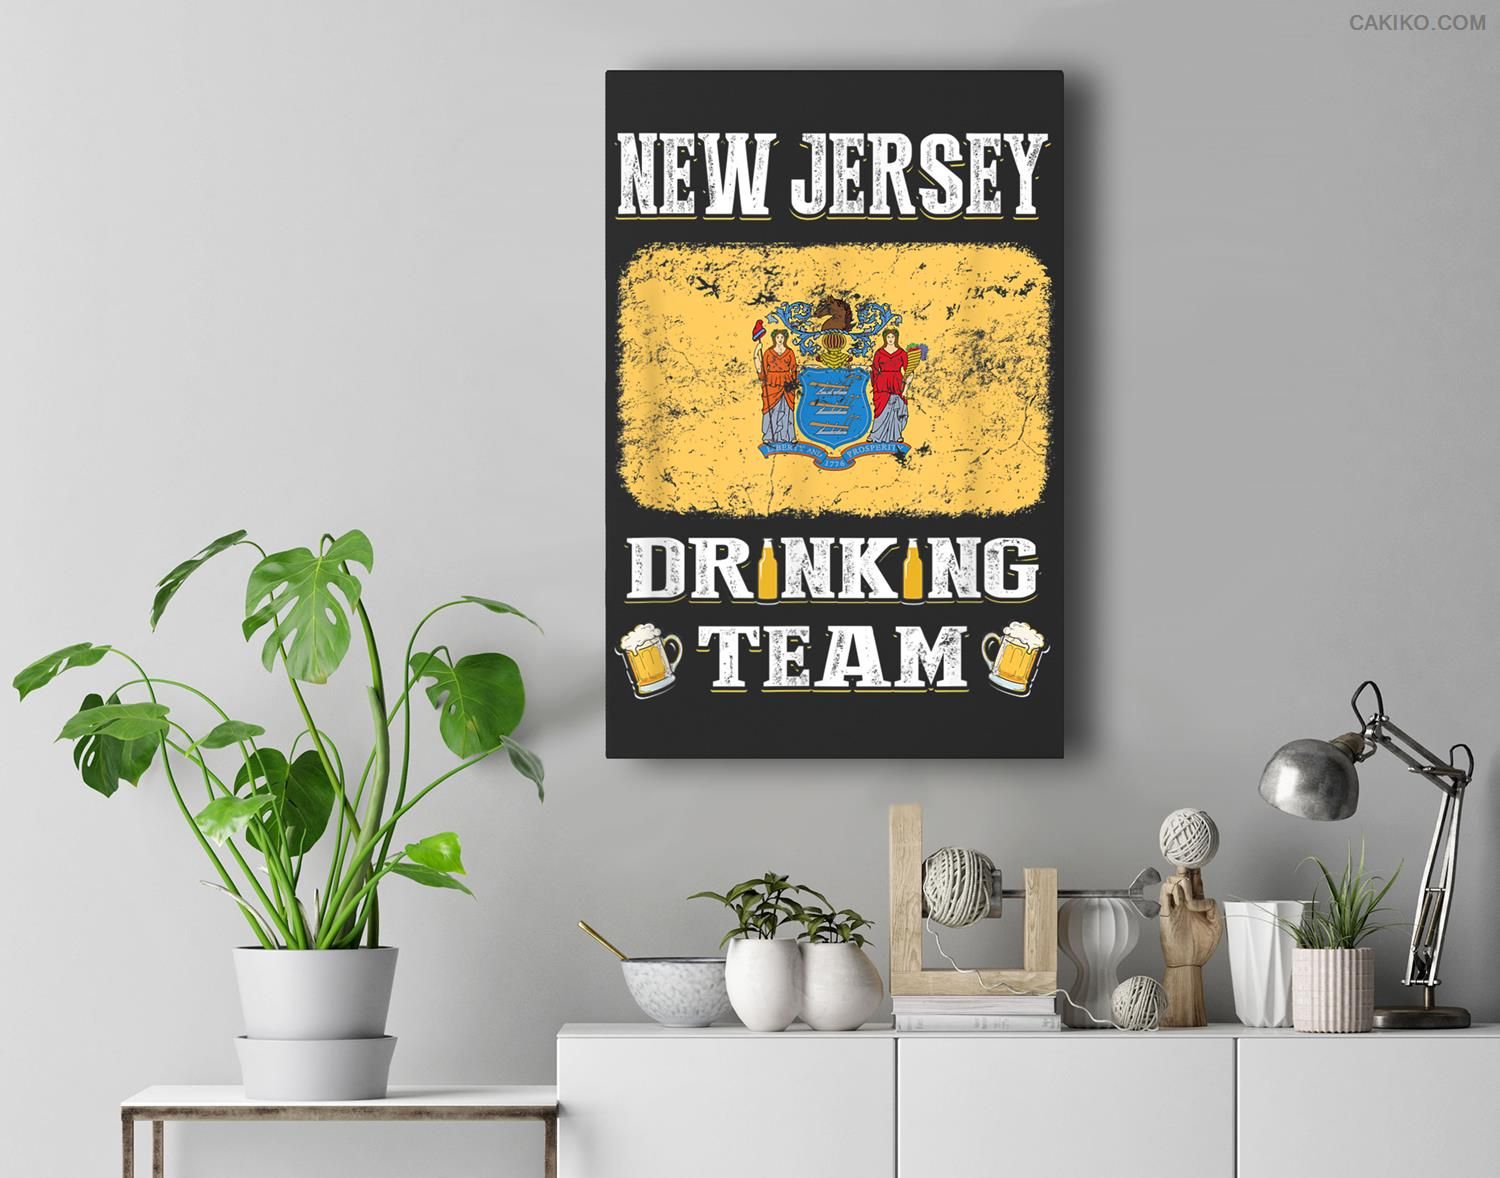 New Jersey Drinking Team Funny Beer Premium Wall Art Canvas Decor